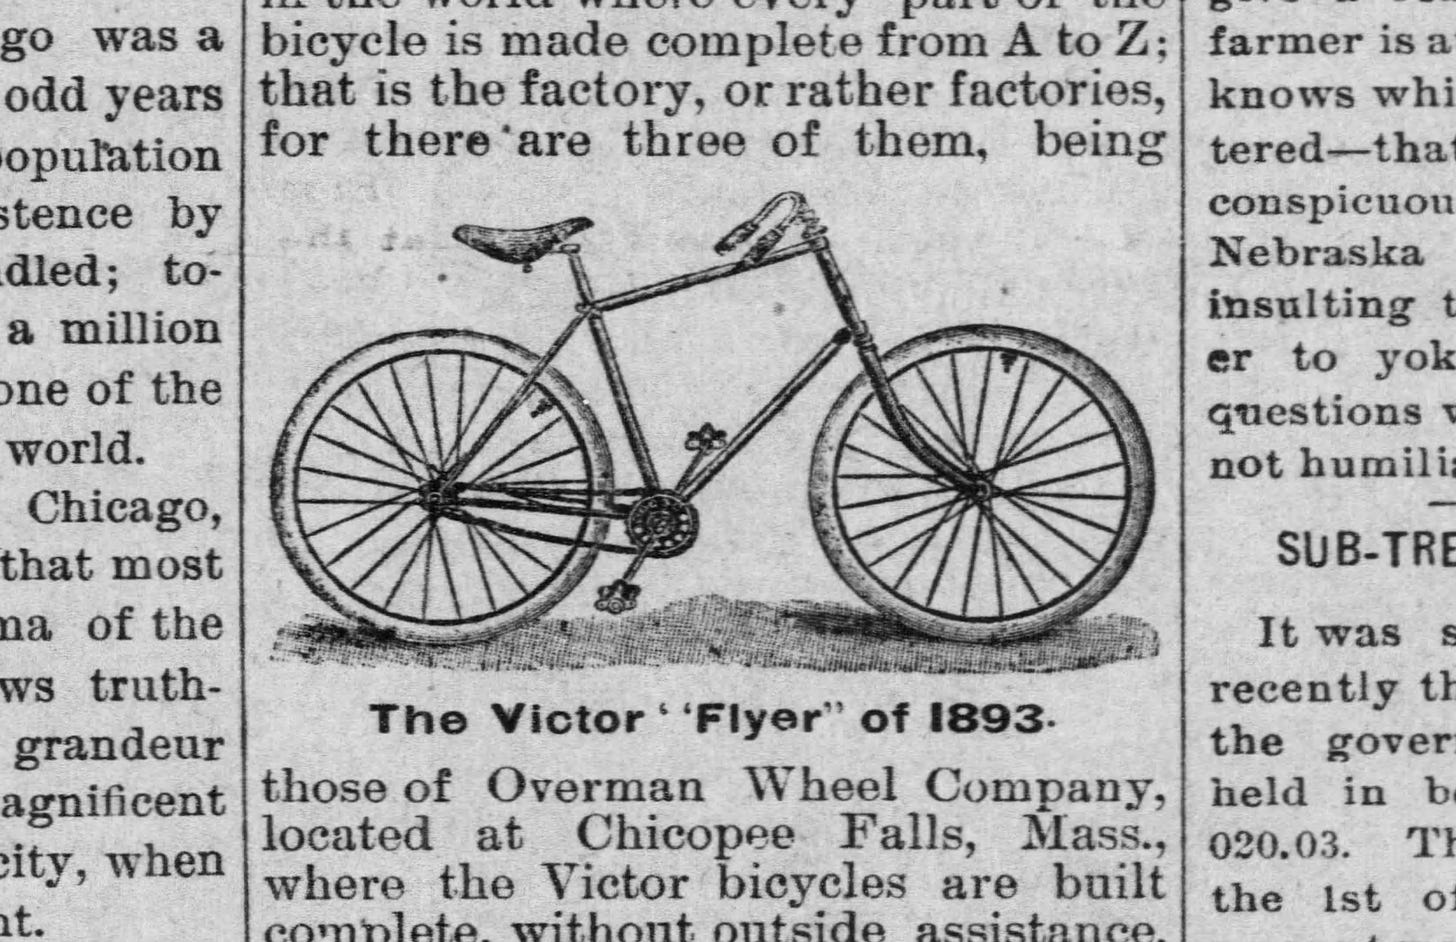 Article from The Valley Falls Vindicator newspaper, Valley Falls, Kansas, Saturday, July 29, 1893, featuring a drawing of The Victor "Flyer" safety bicycle of 1893